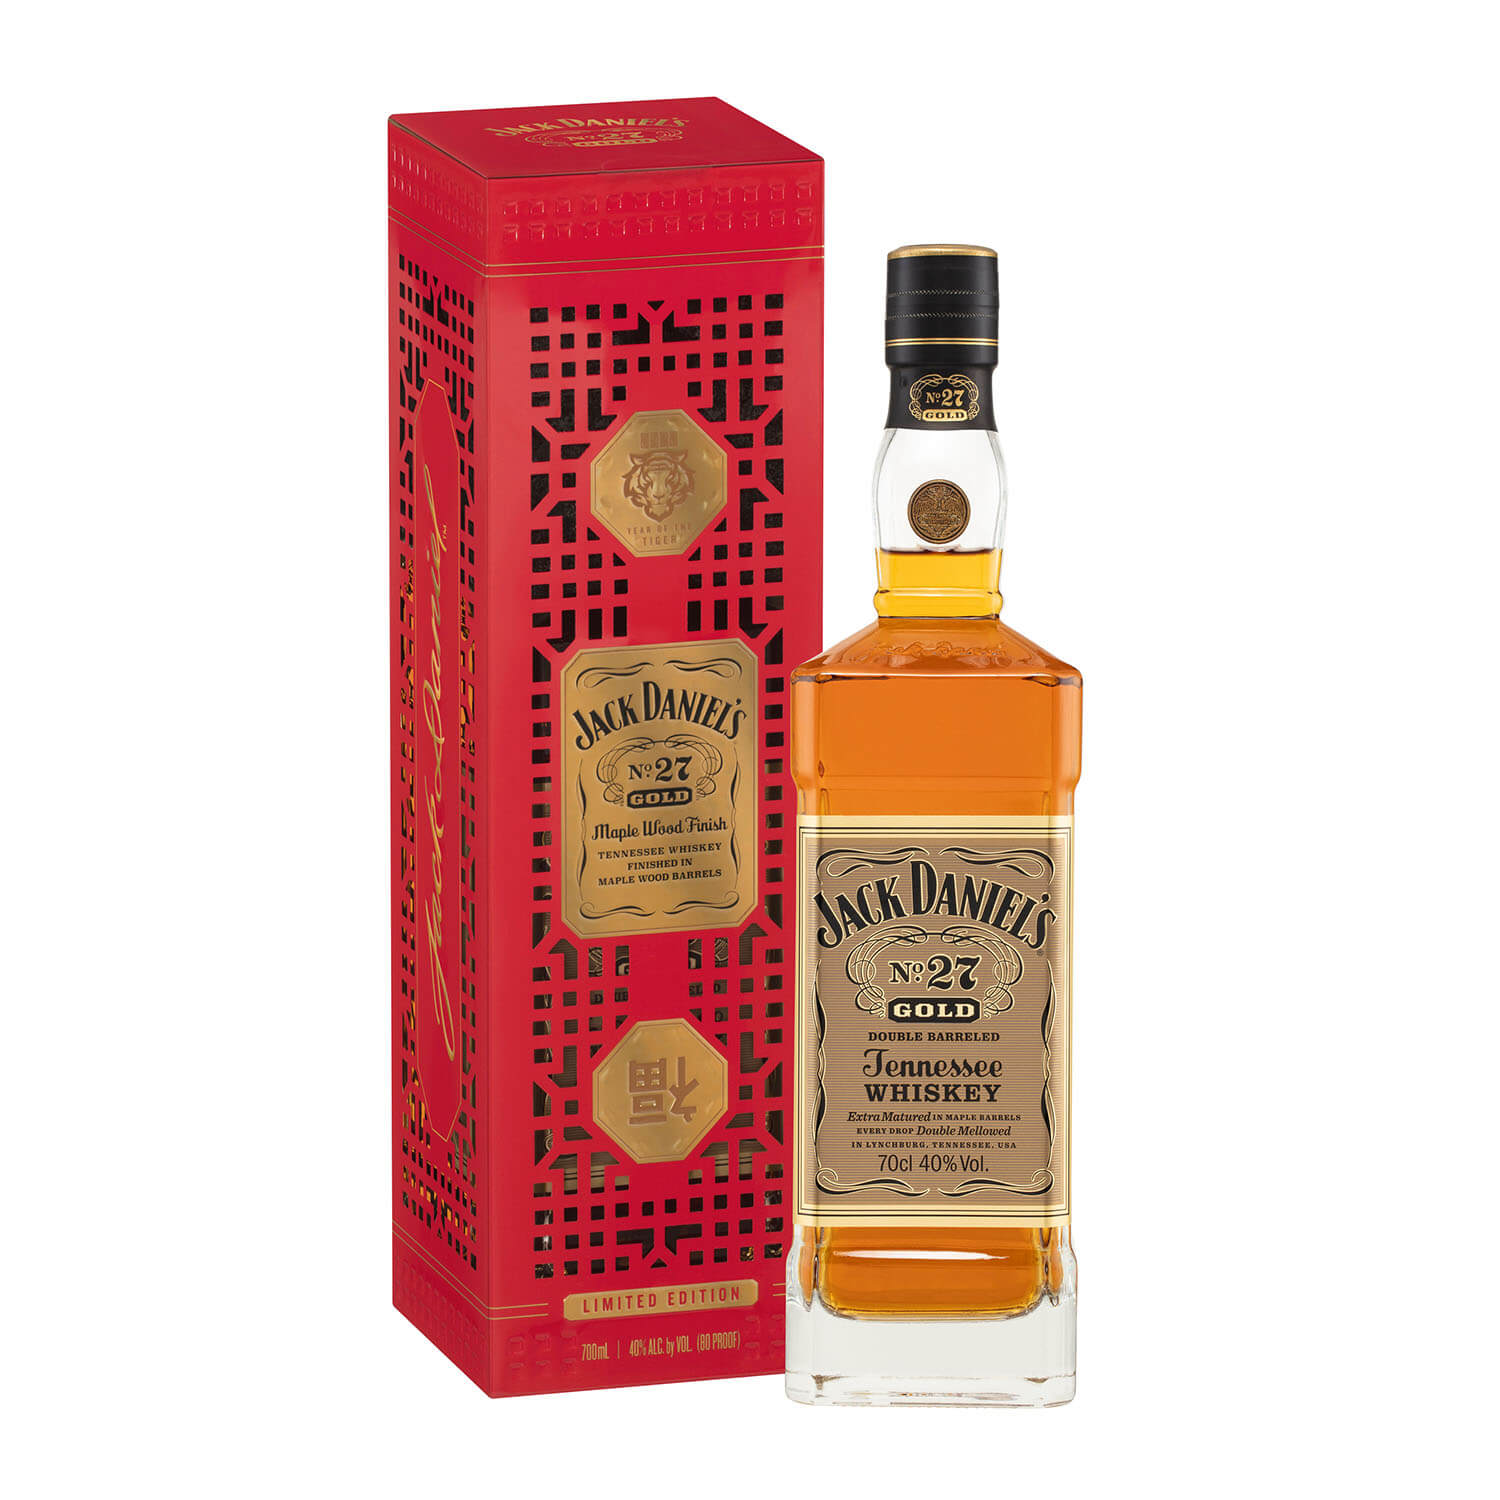 Jack Daniels No.27 Gold ‘Year of the Tiger’ Chinese New Year 2022, American Whiskey, The Old Barrelhouse